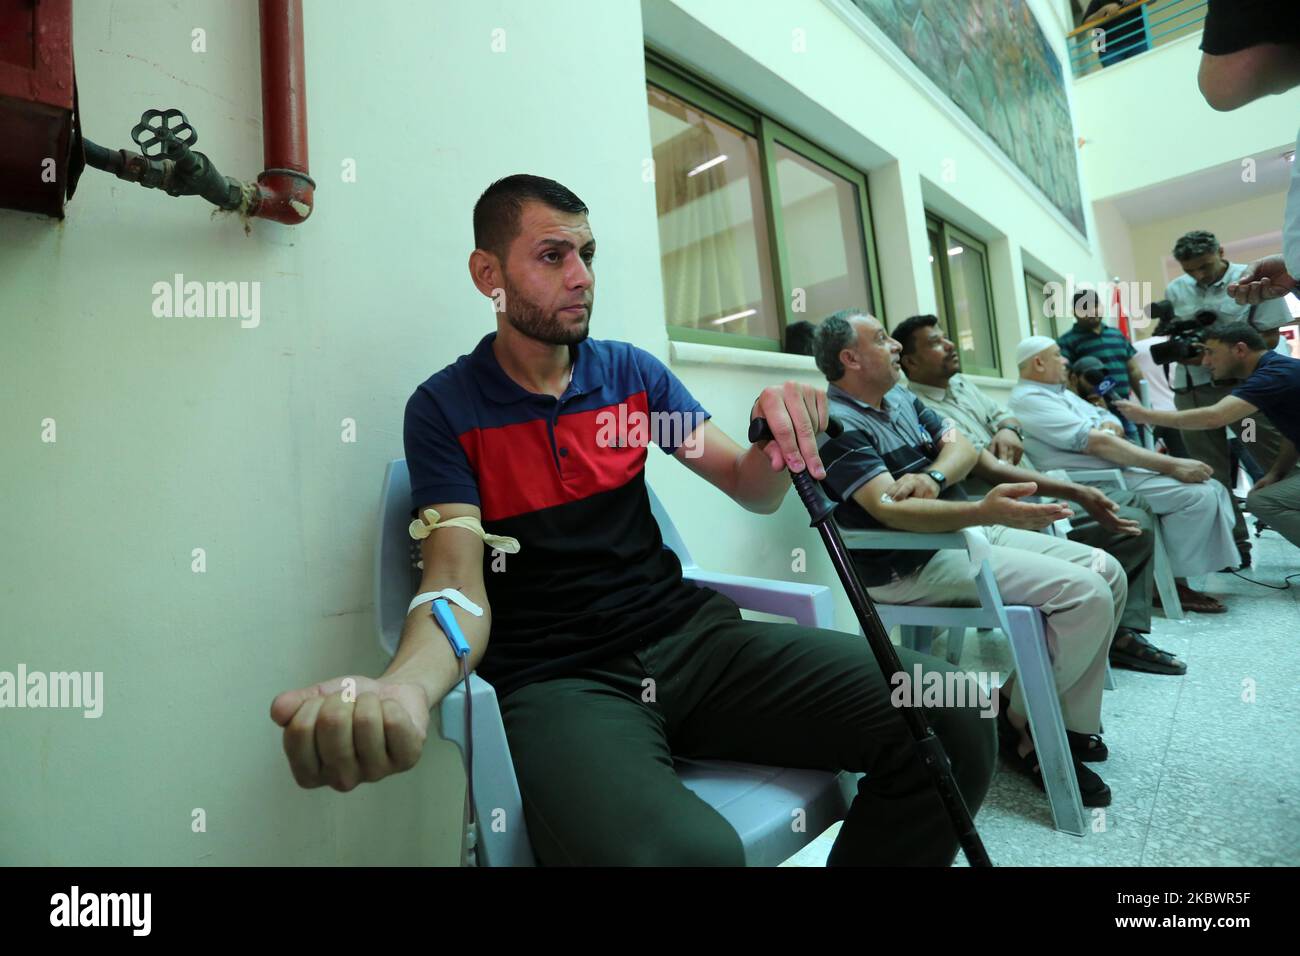 Palestinians donate bloods, in Gaza, Palestine, on August 5, 2020 during a public blood donation campaign for the lebanese community following the explosion at Beirut port. (Photo by Majdi Fathi/NurPhoto) Stock Photo